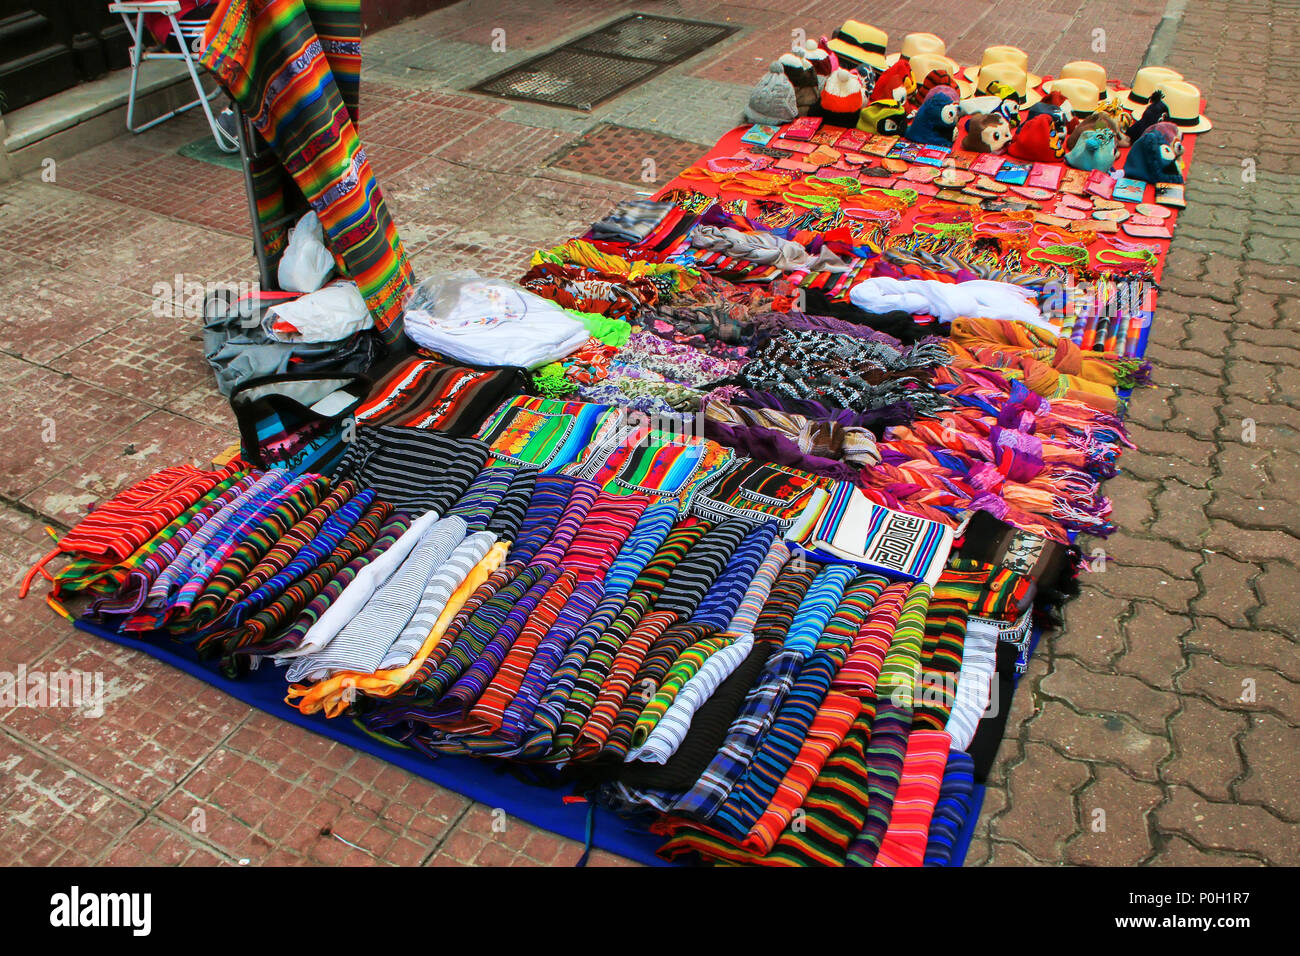 Display of traditional textile at the street market in Montevideo, Uruguay. Montevideo is the capital and largest city of Uruguay. Stock Photo